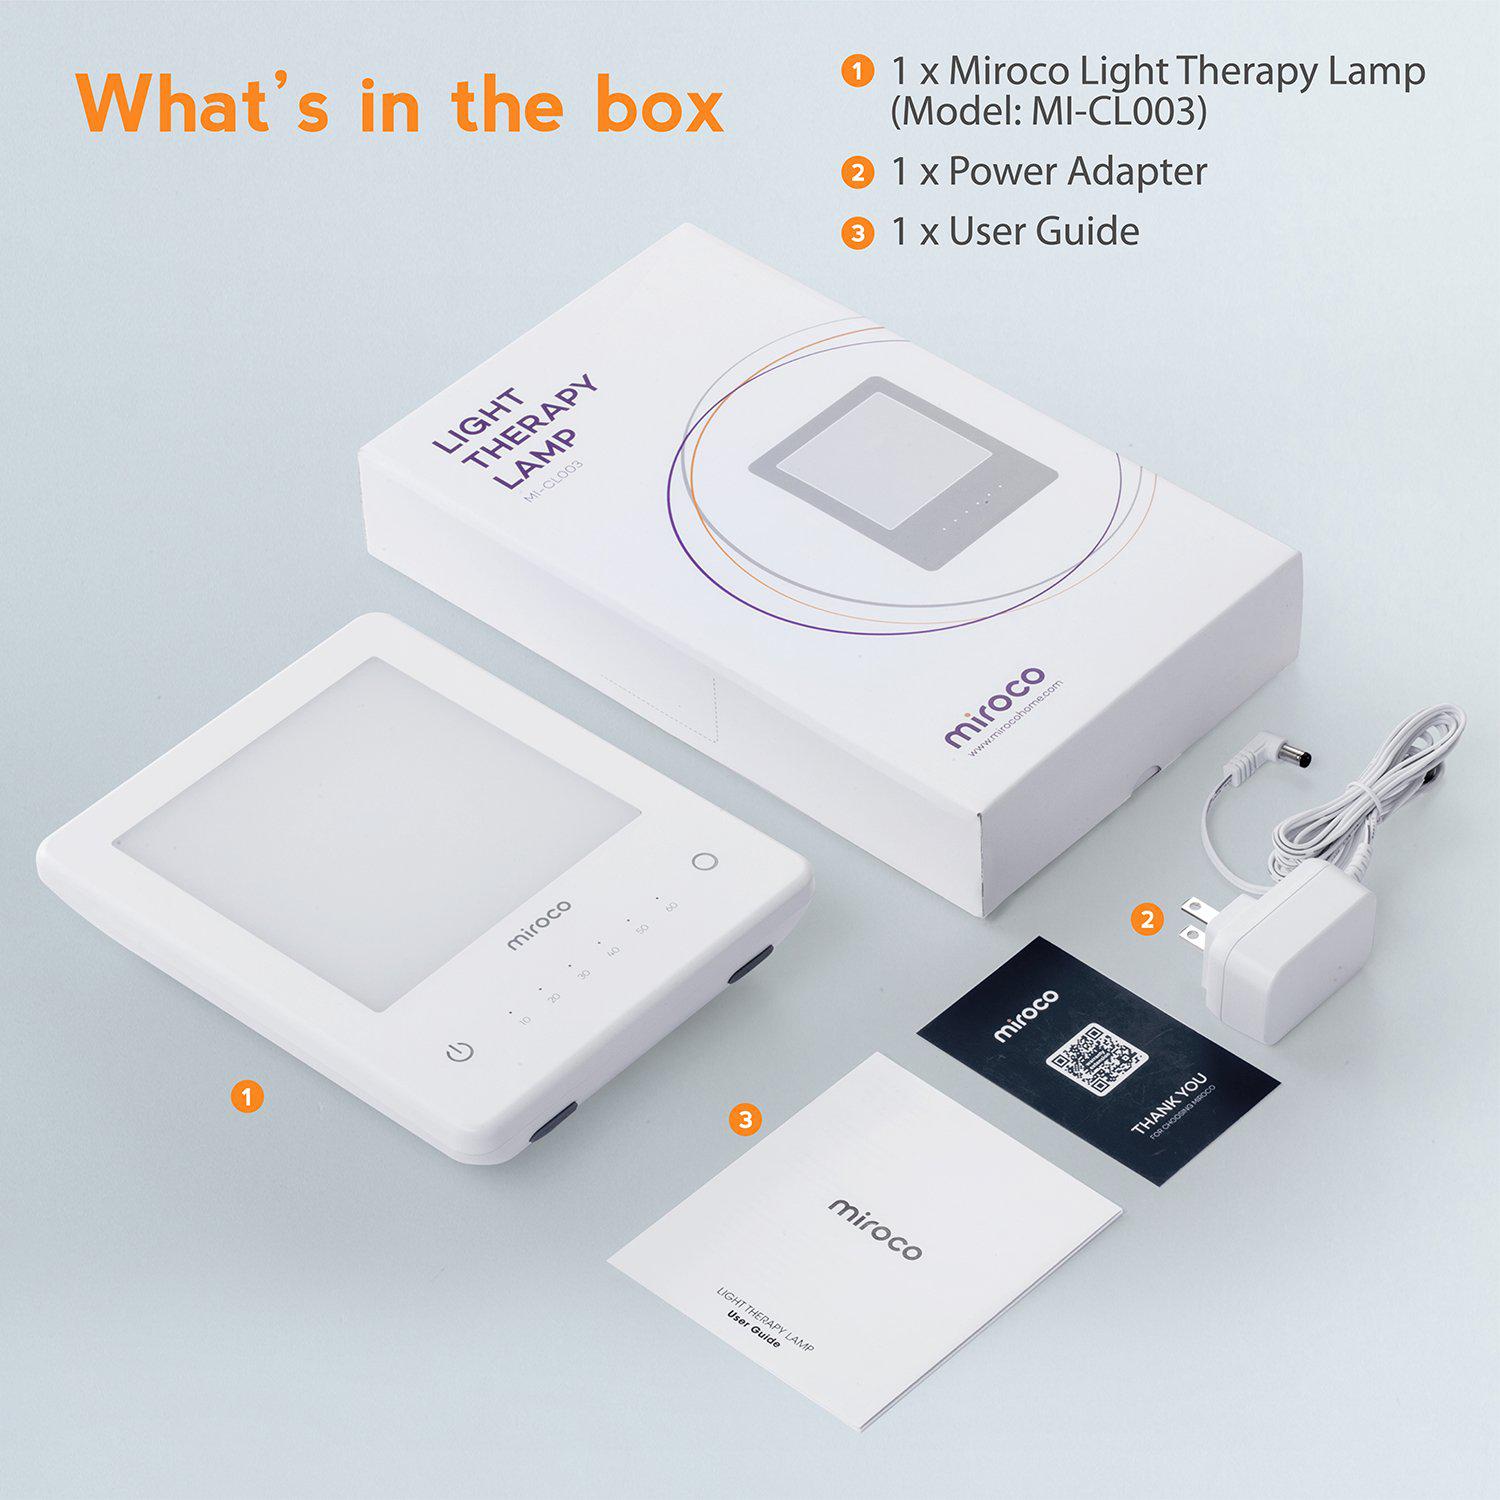 Products Light Therapy Lamp, Miroco UV Free 10000 Lux Therapy Lamp